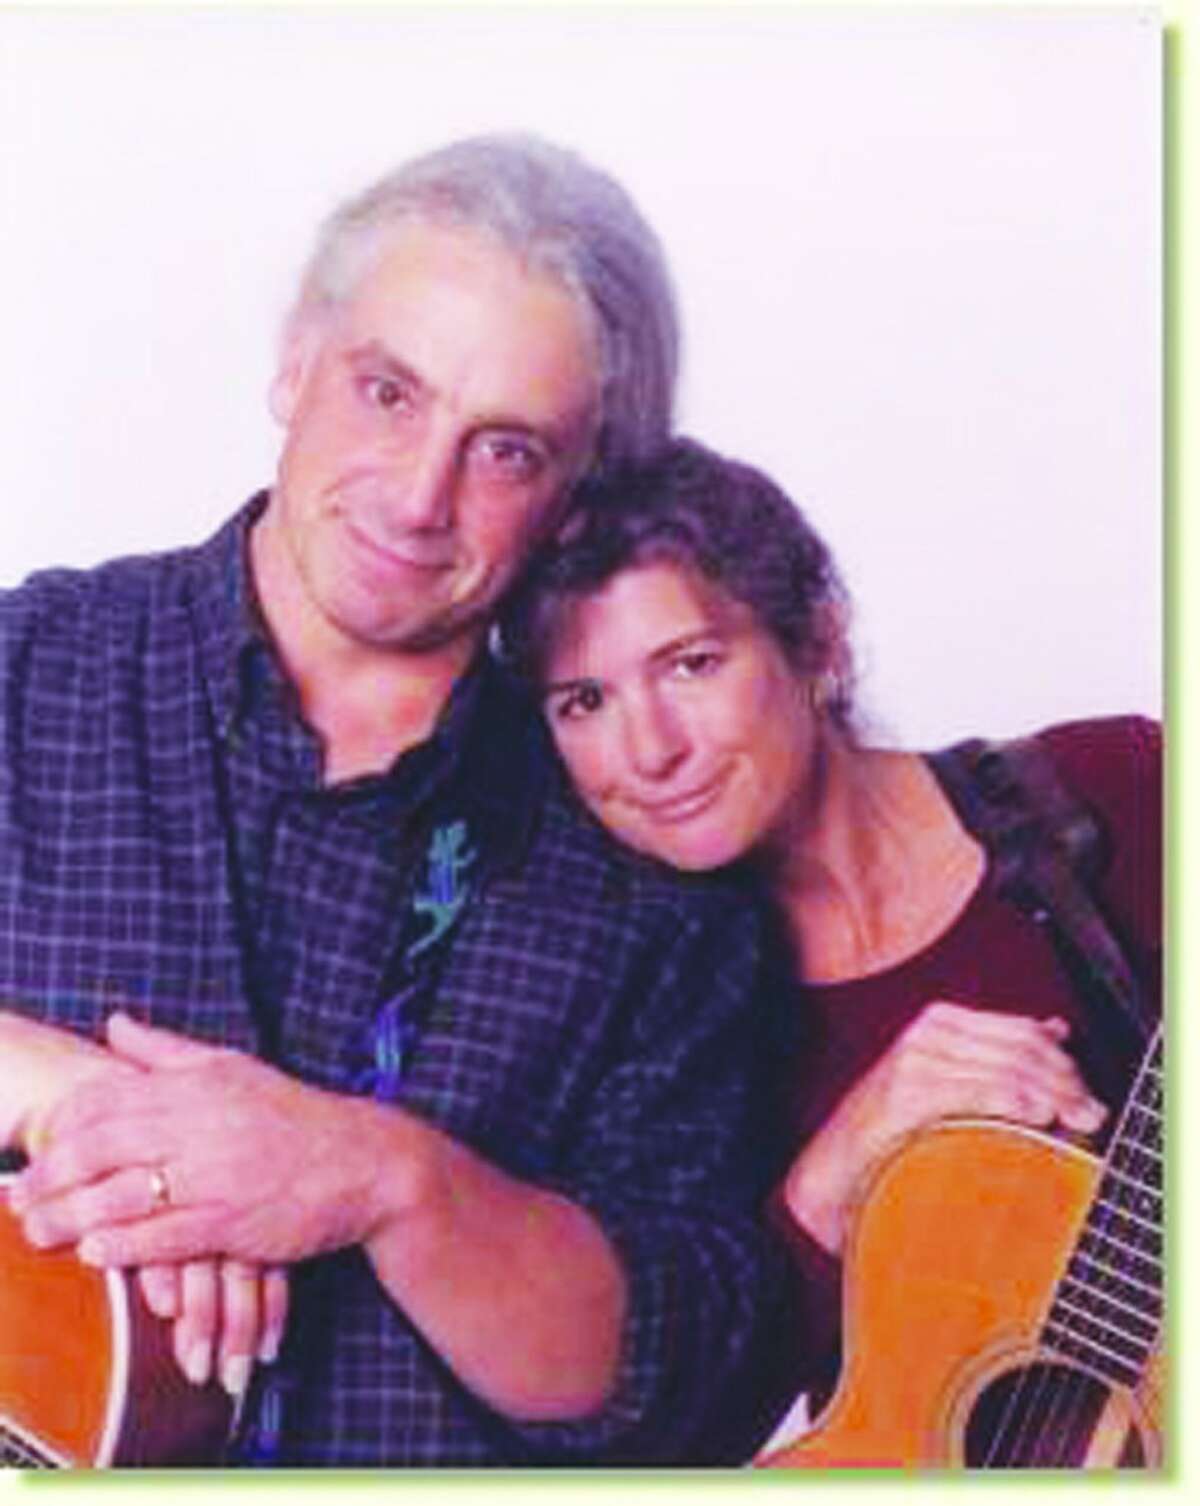 CAREFUL INDECISION: Folk singers Rich Prezioso and Jacquie Manning will be performing their unique combination of musical styles, which includes elements of country, blues, swing and Irish folk songs, at The Brookside Inn on March 23. (Courtesy Photo)